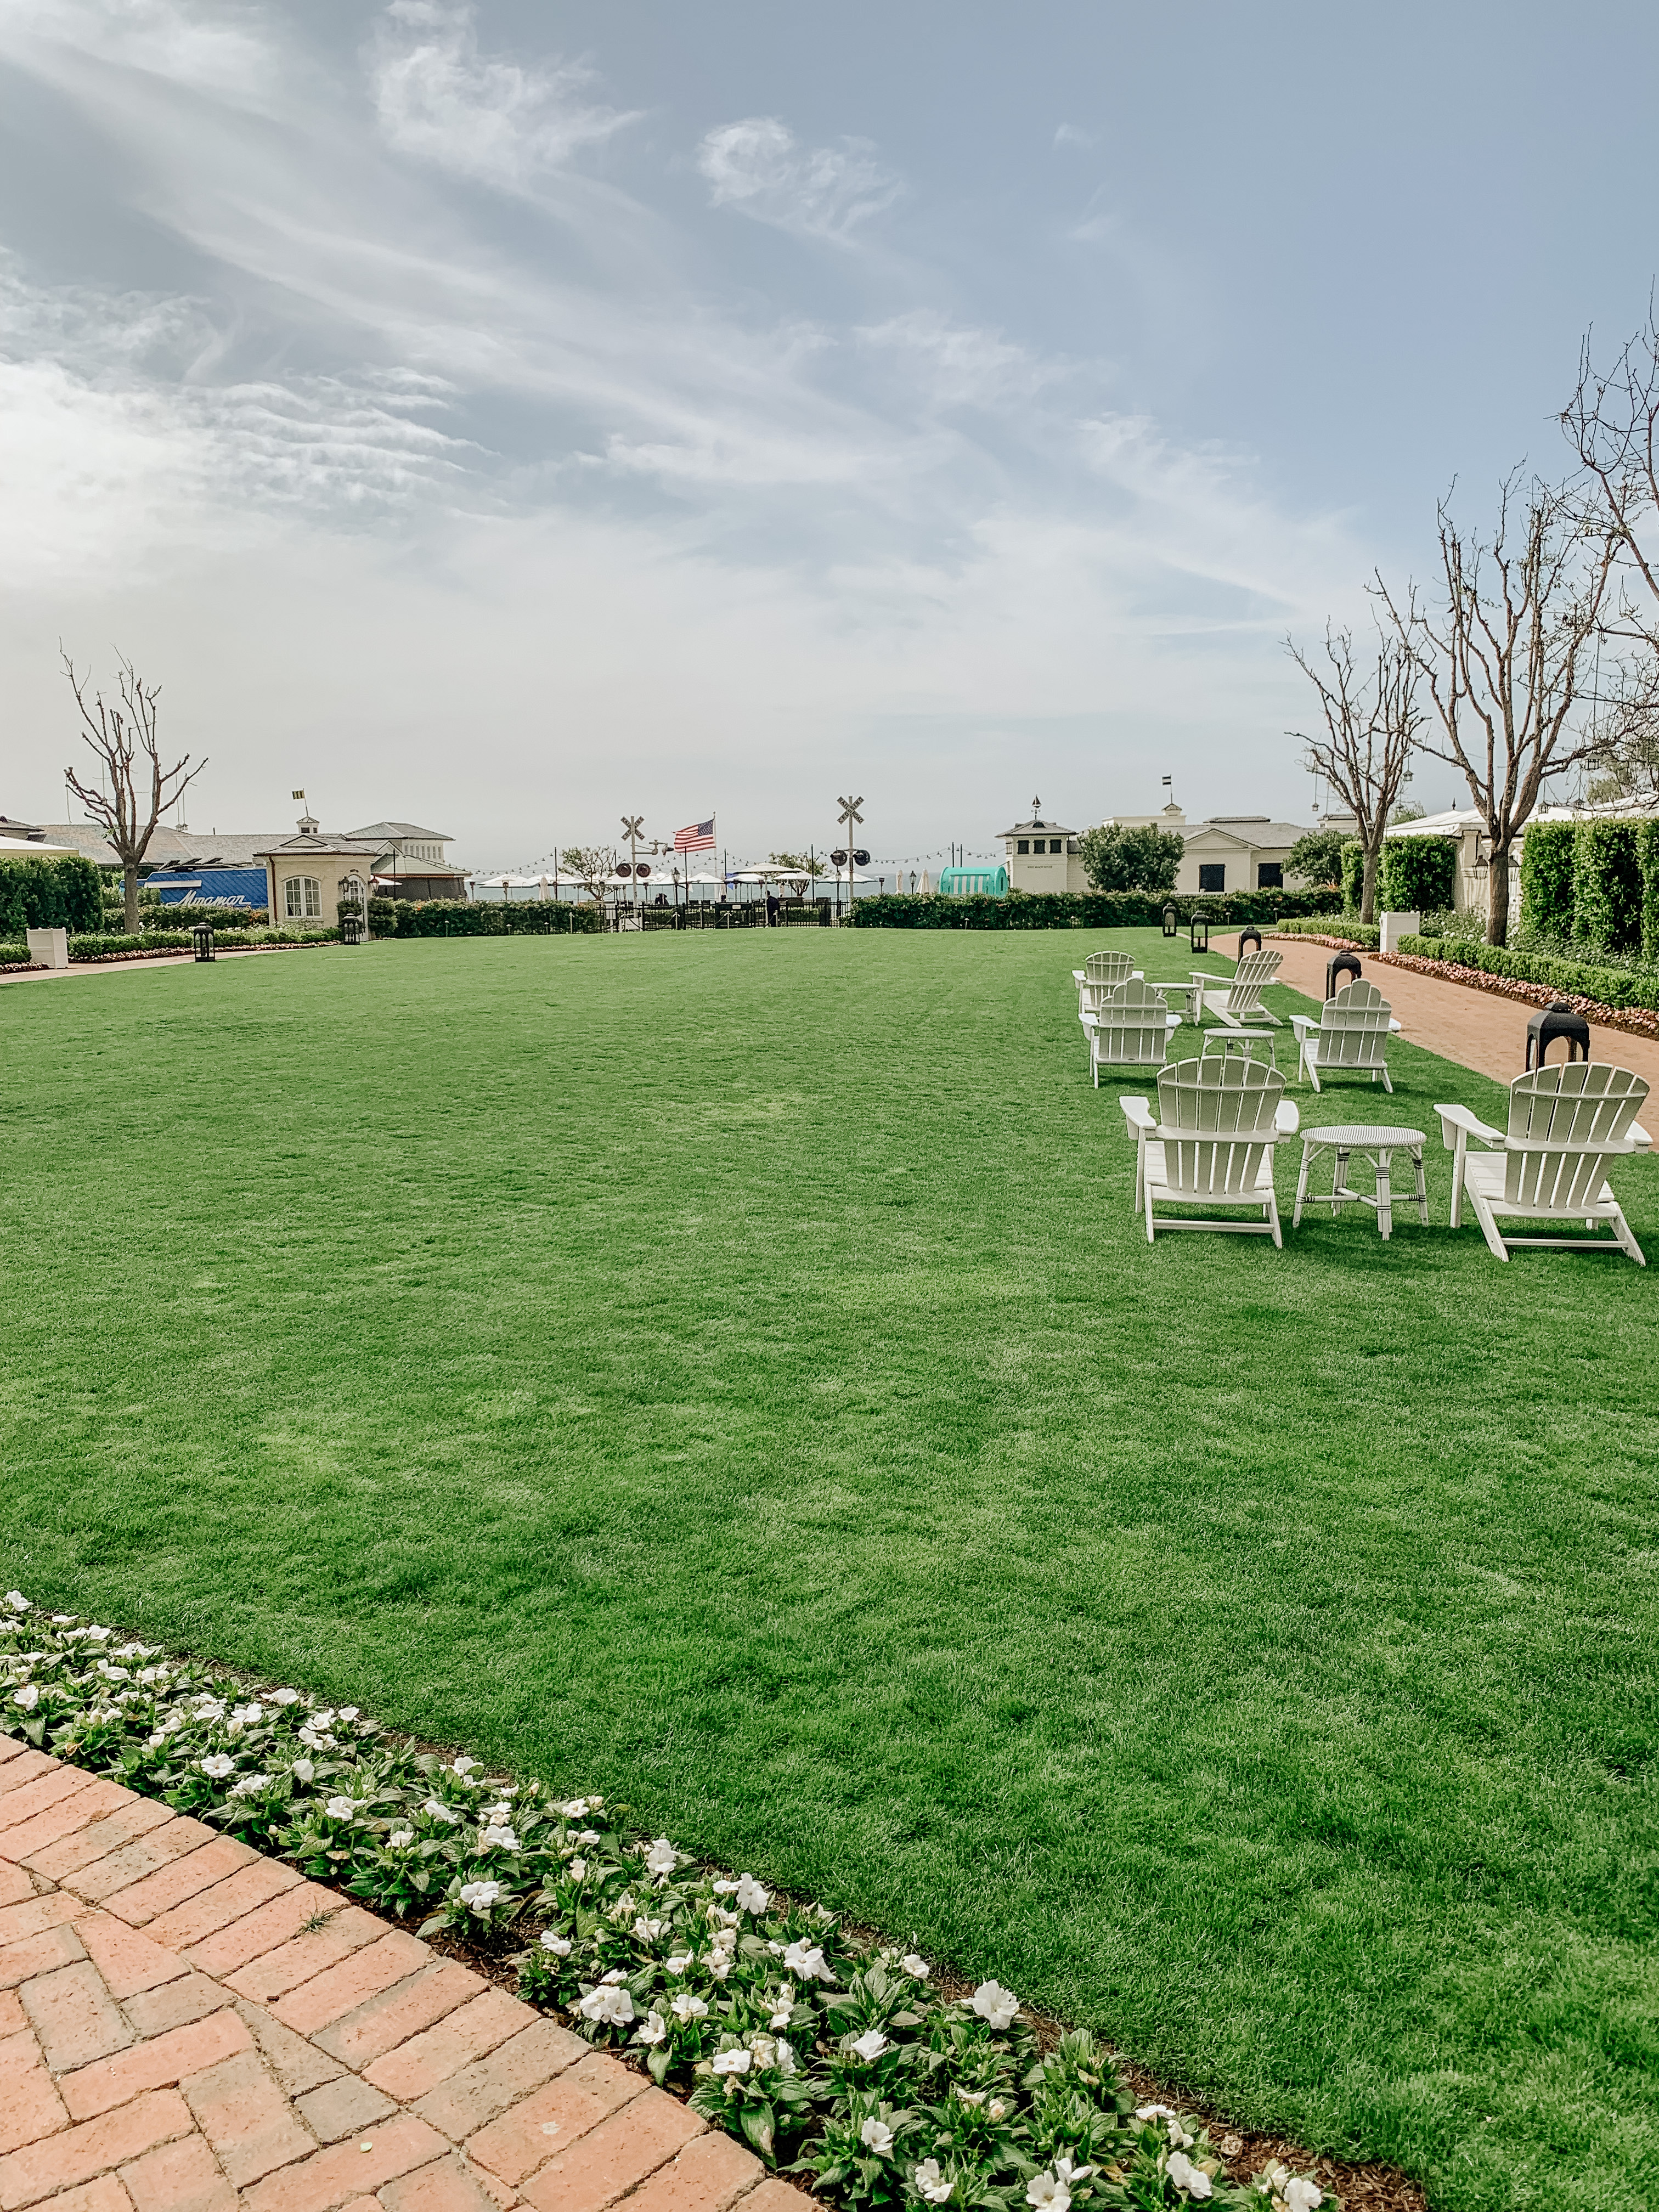 Miramar hotel lawn with Adirondack chairs overlooking the Pacific ocean